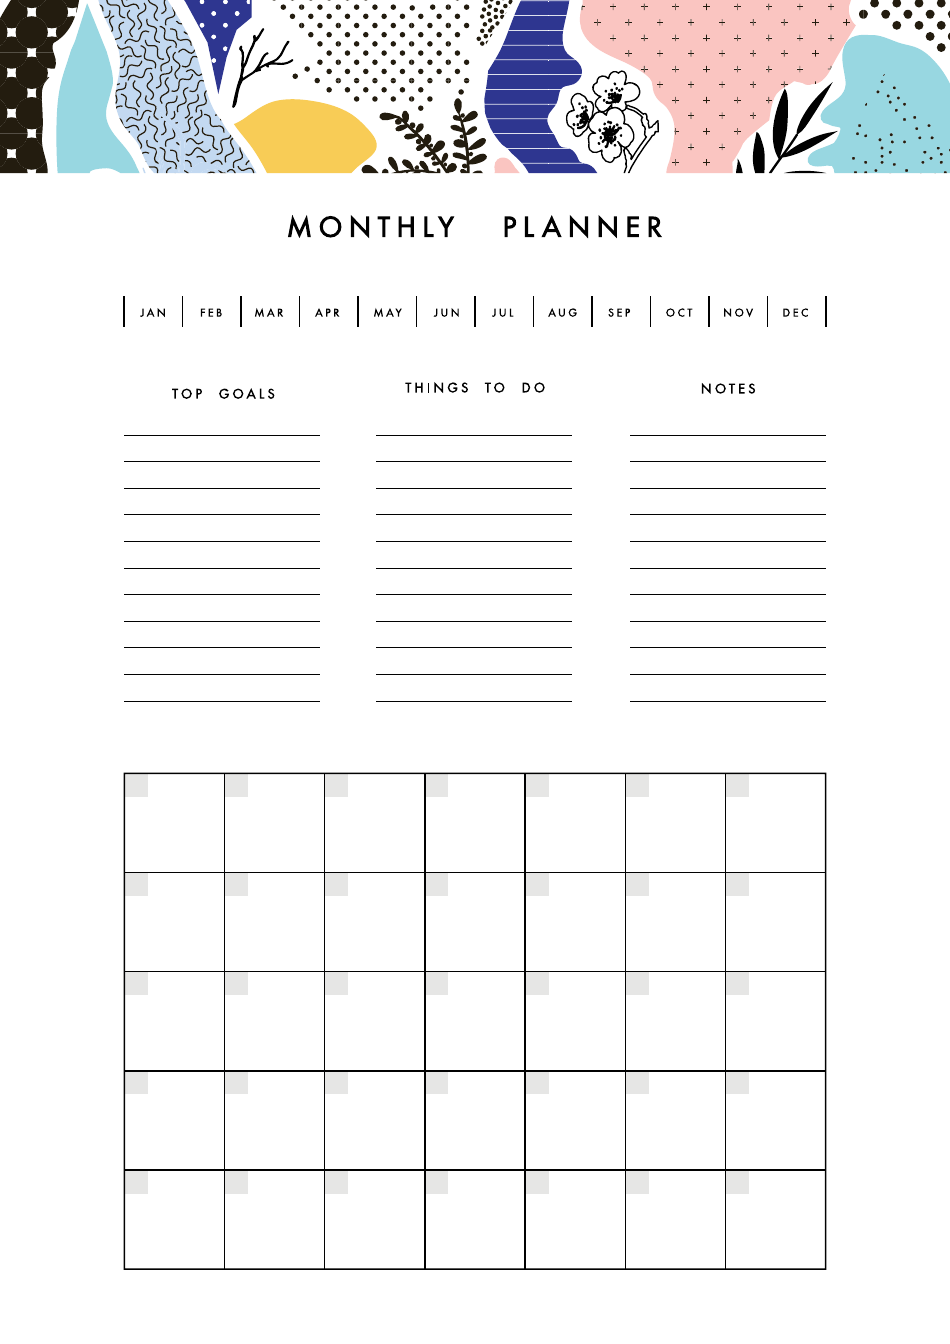 Monthly Planner Template - Notes